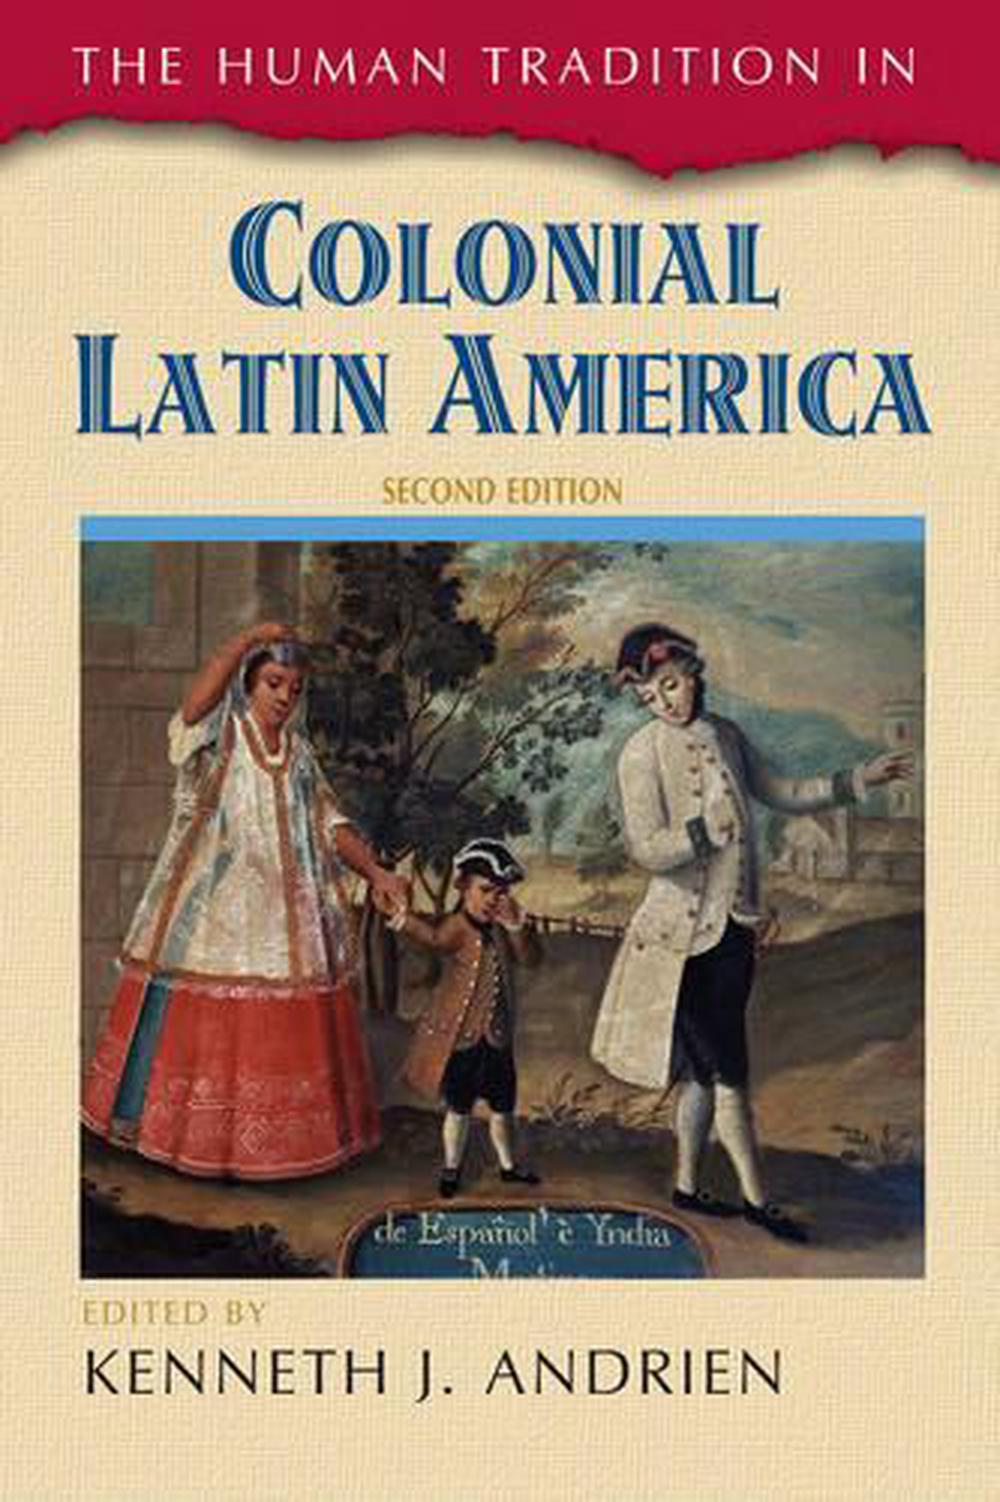 The Human Tradition in Colonial Latin America by J Andrien